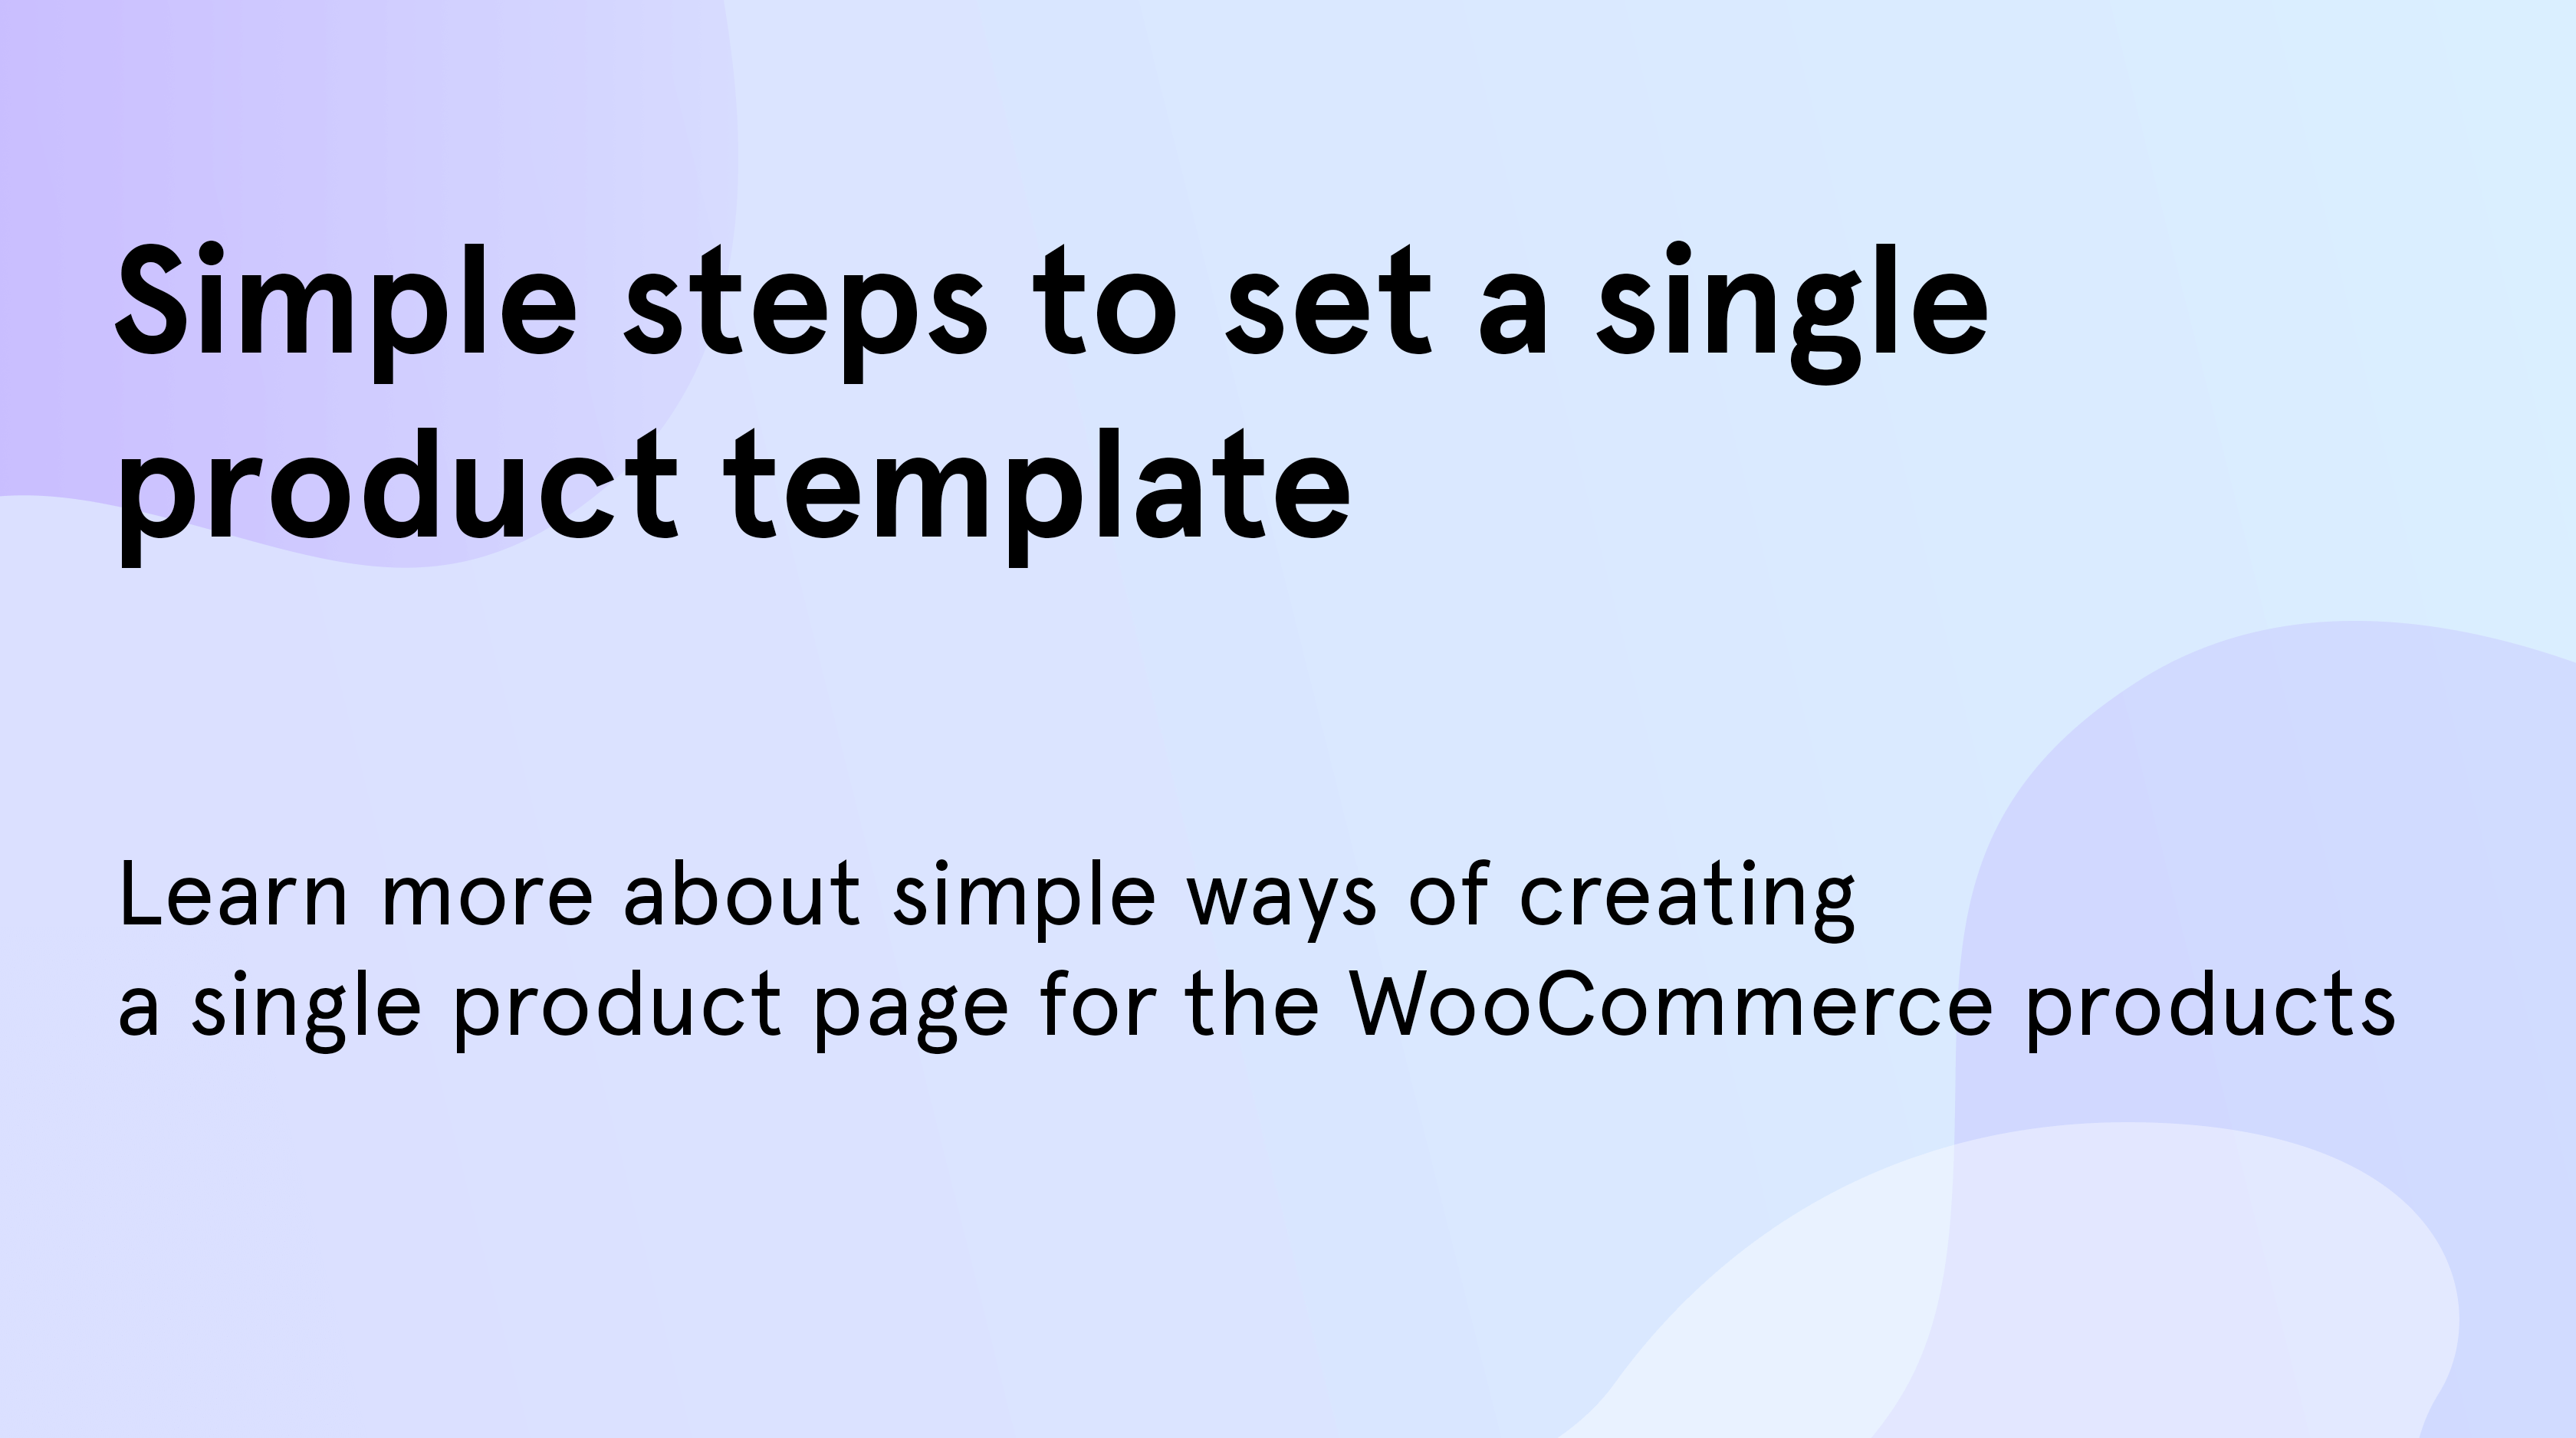 Simple steps to set a single product template on the WooCommerce theme